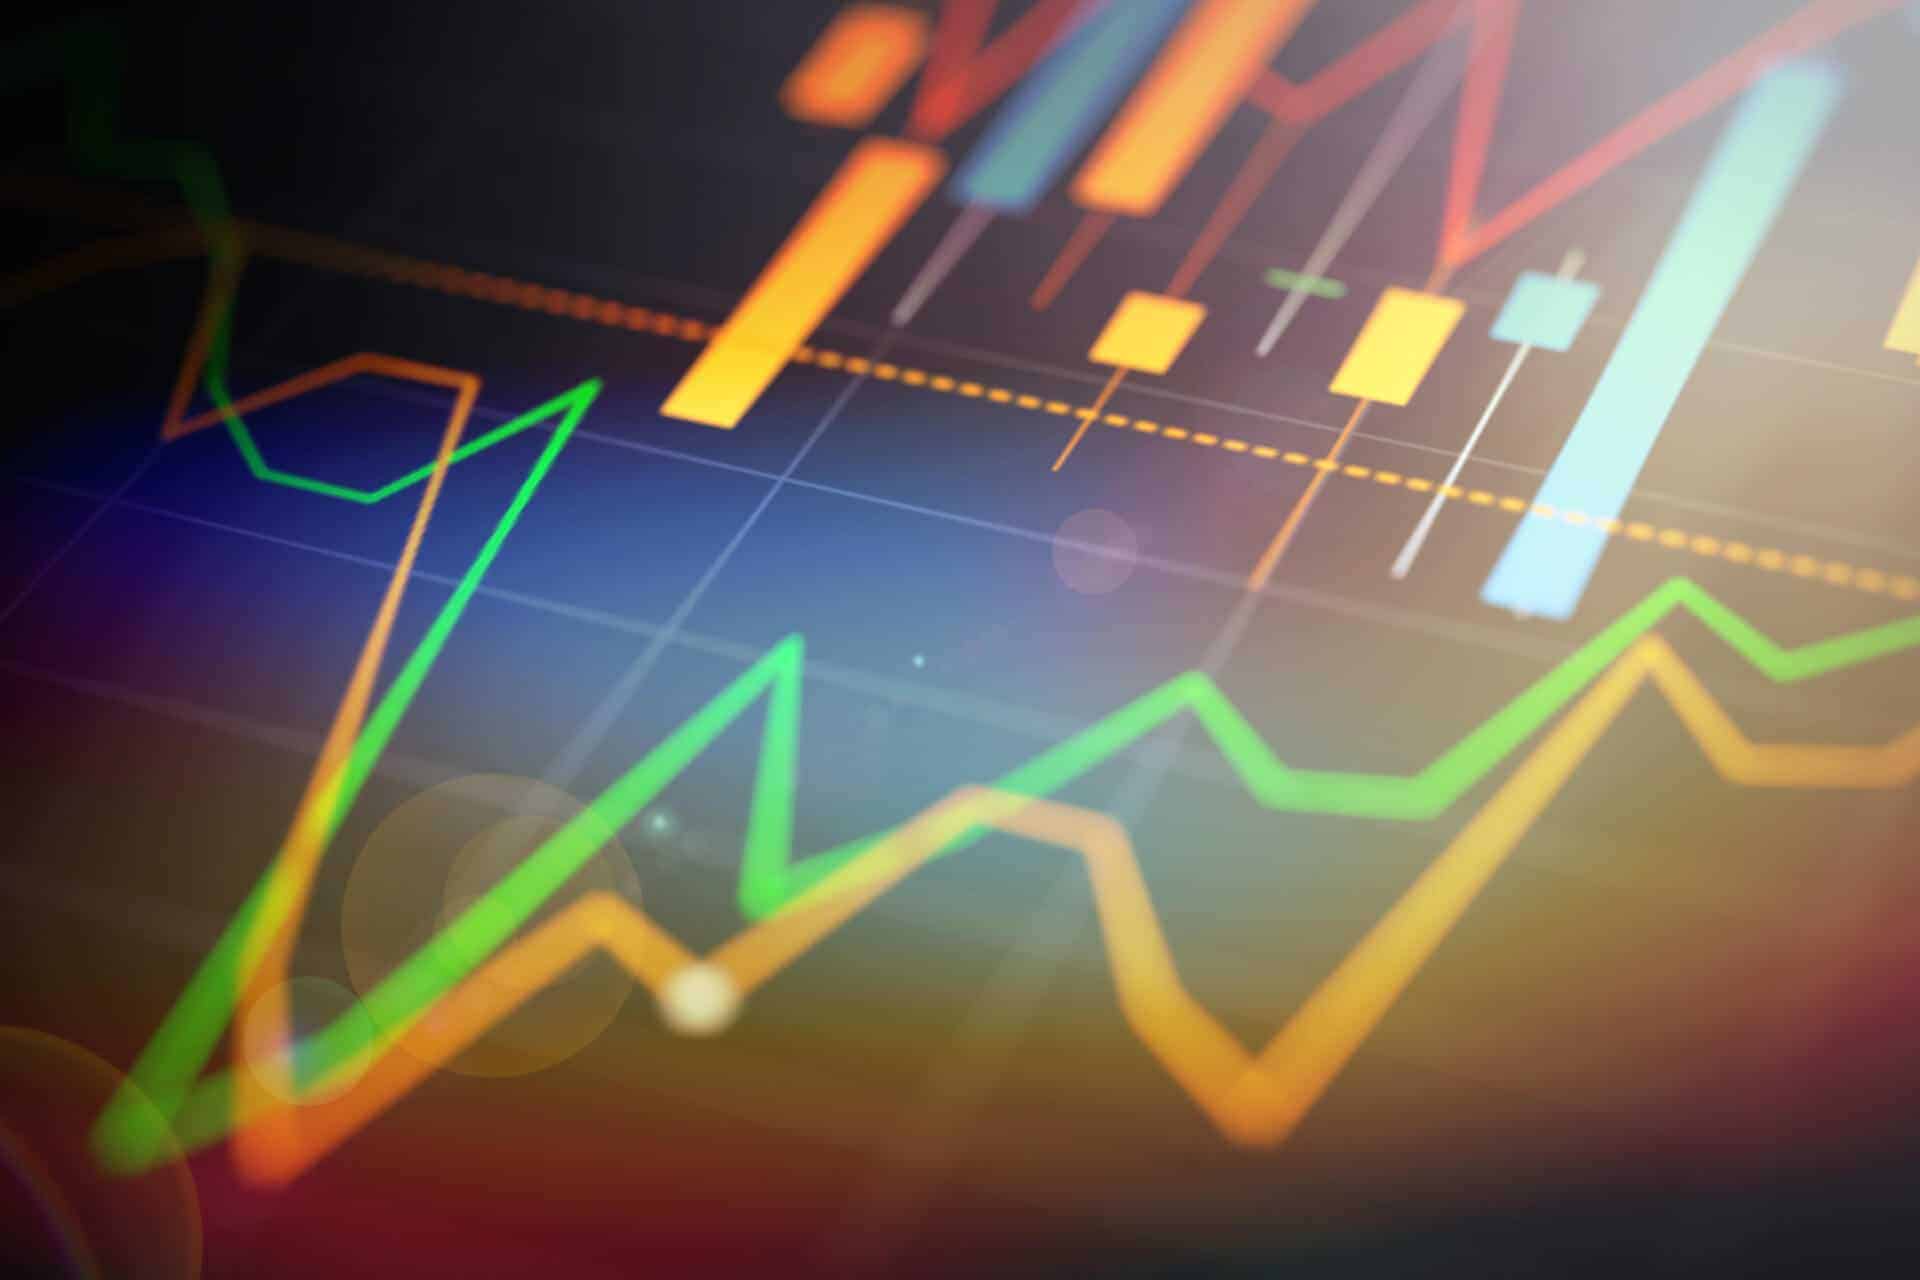 Price volatility is the norm in crypto markets, but last week saw the price of decentralized finance (DeFi) project Iron Finance’s Titanium (TITAN) 